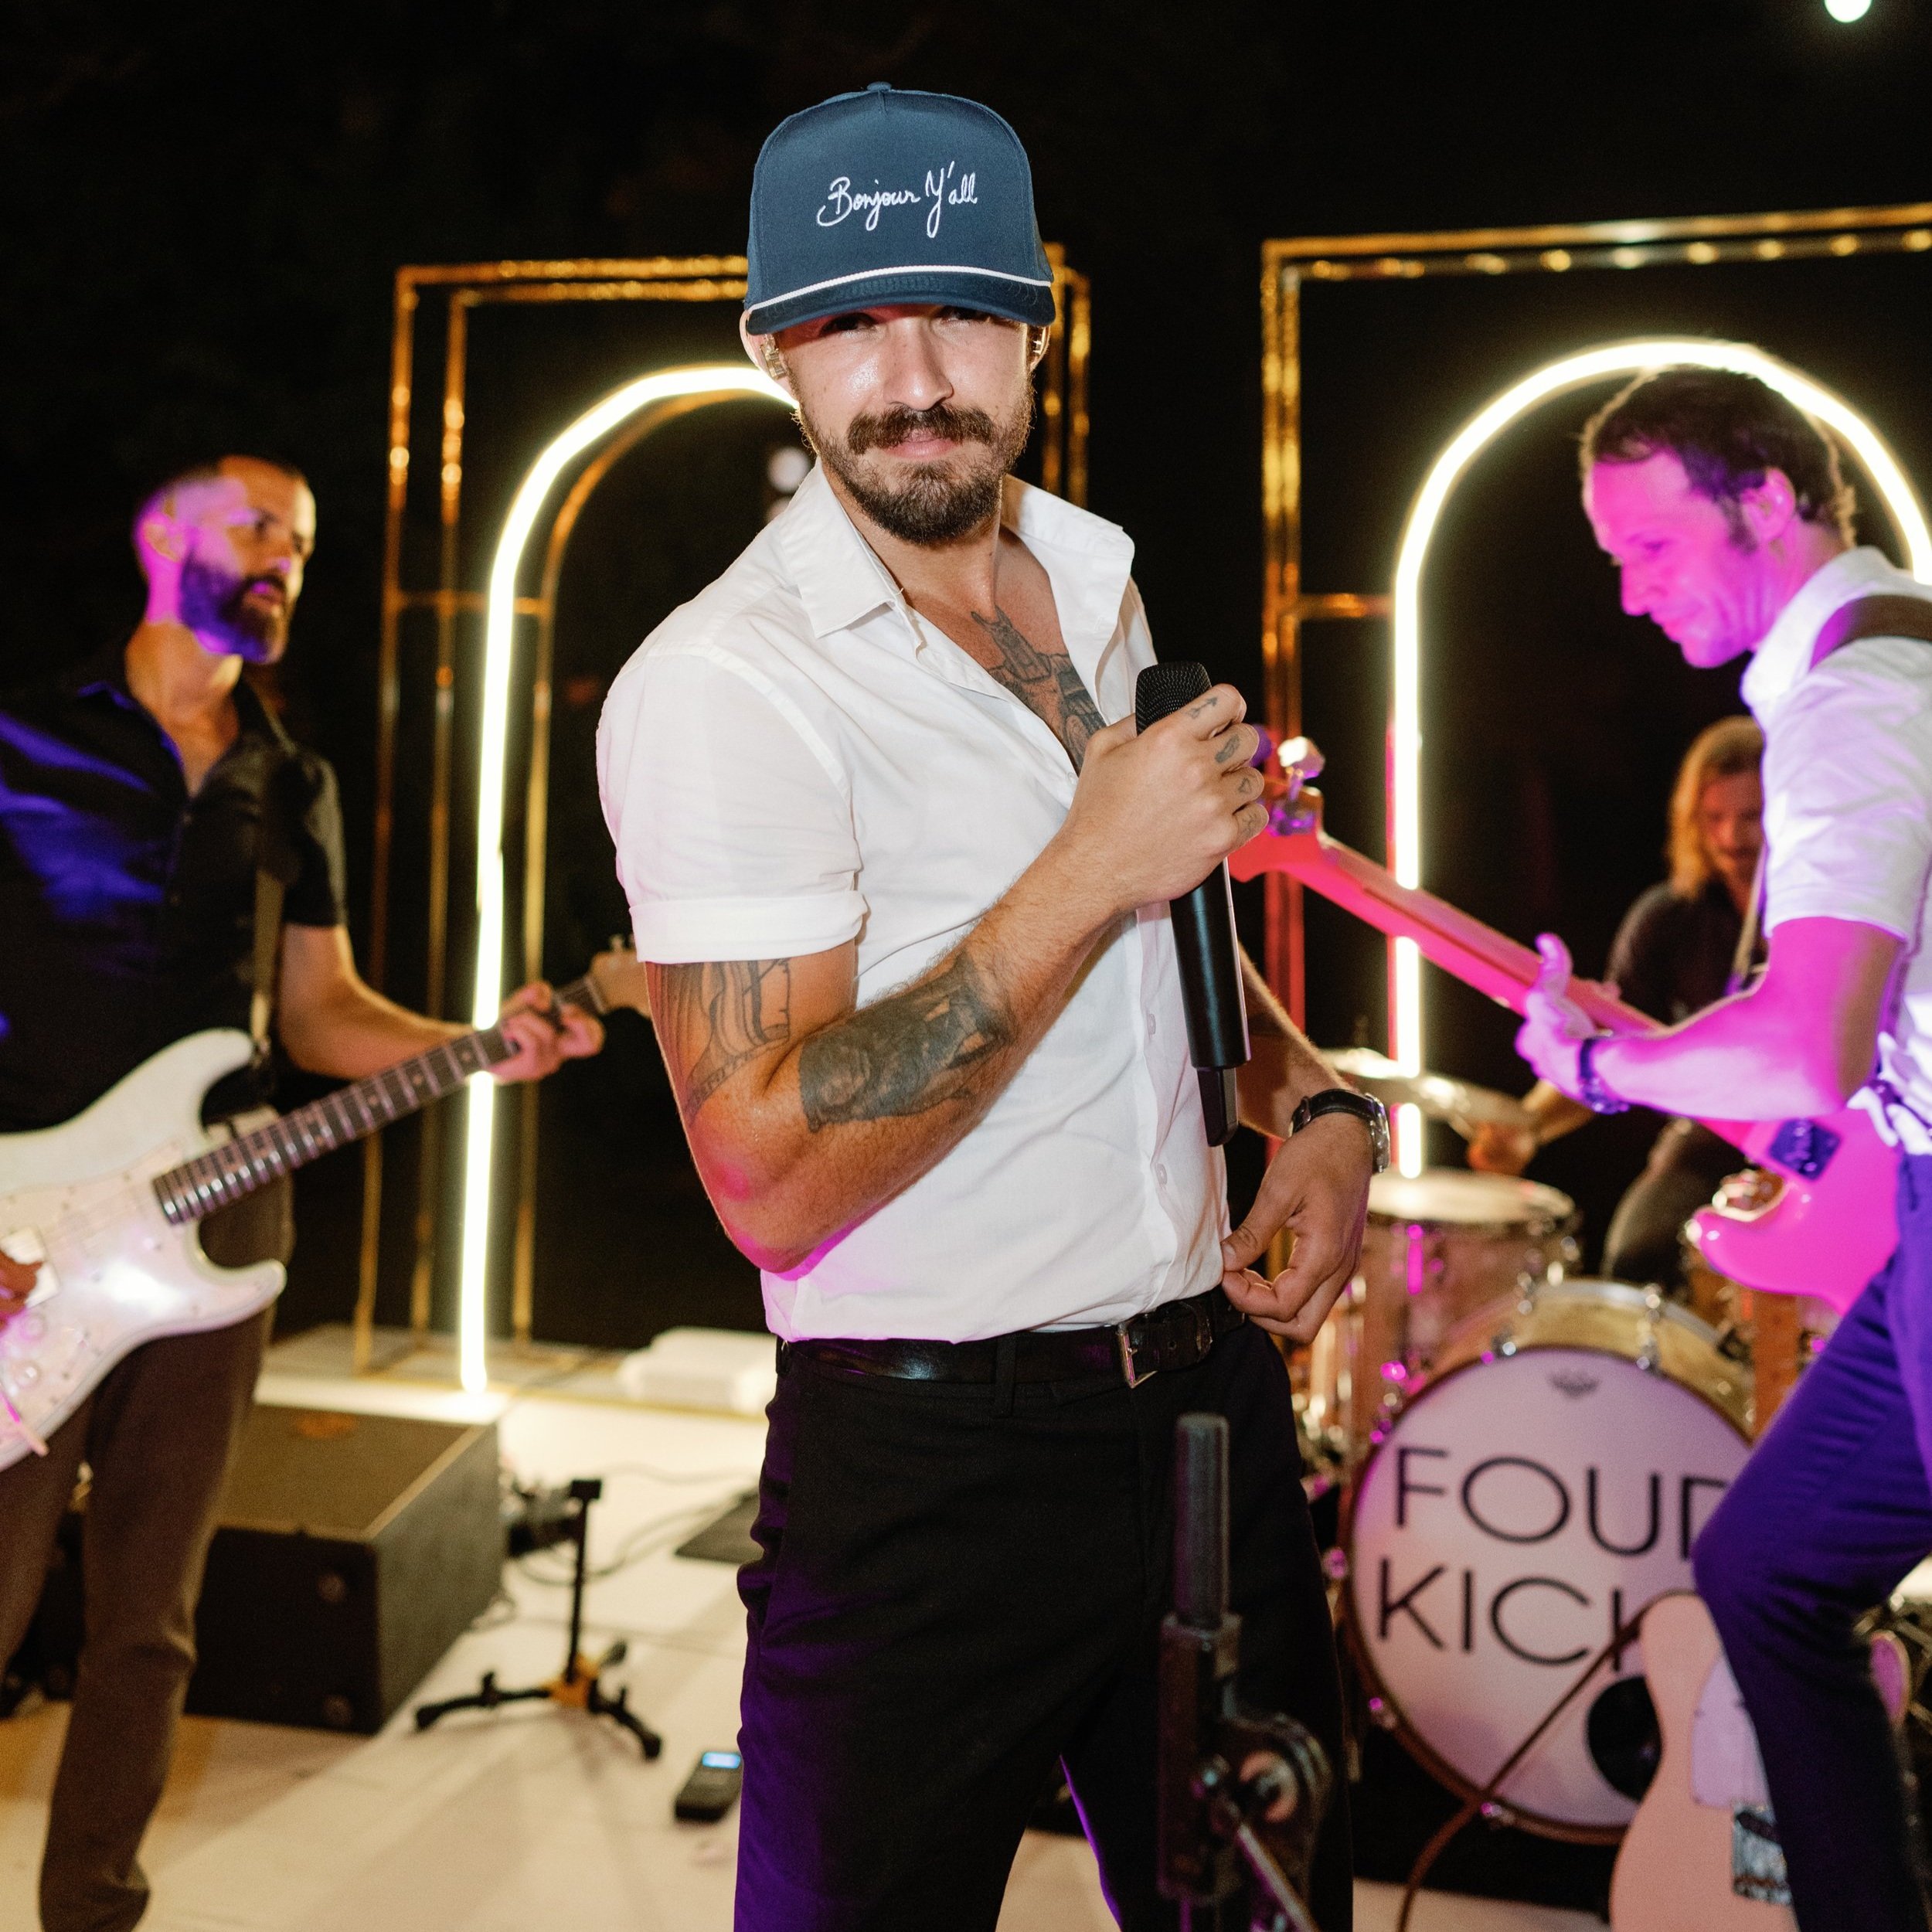 Four-Kicks-Live-band-party-band-party-music-wedding-dance-party-Provence-Chateau-de-Tourreau-South-of-France-luxury-wedding-planning.jpg